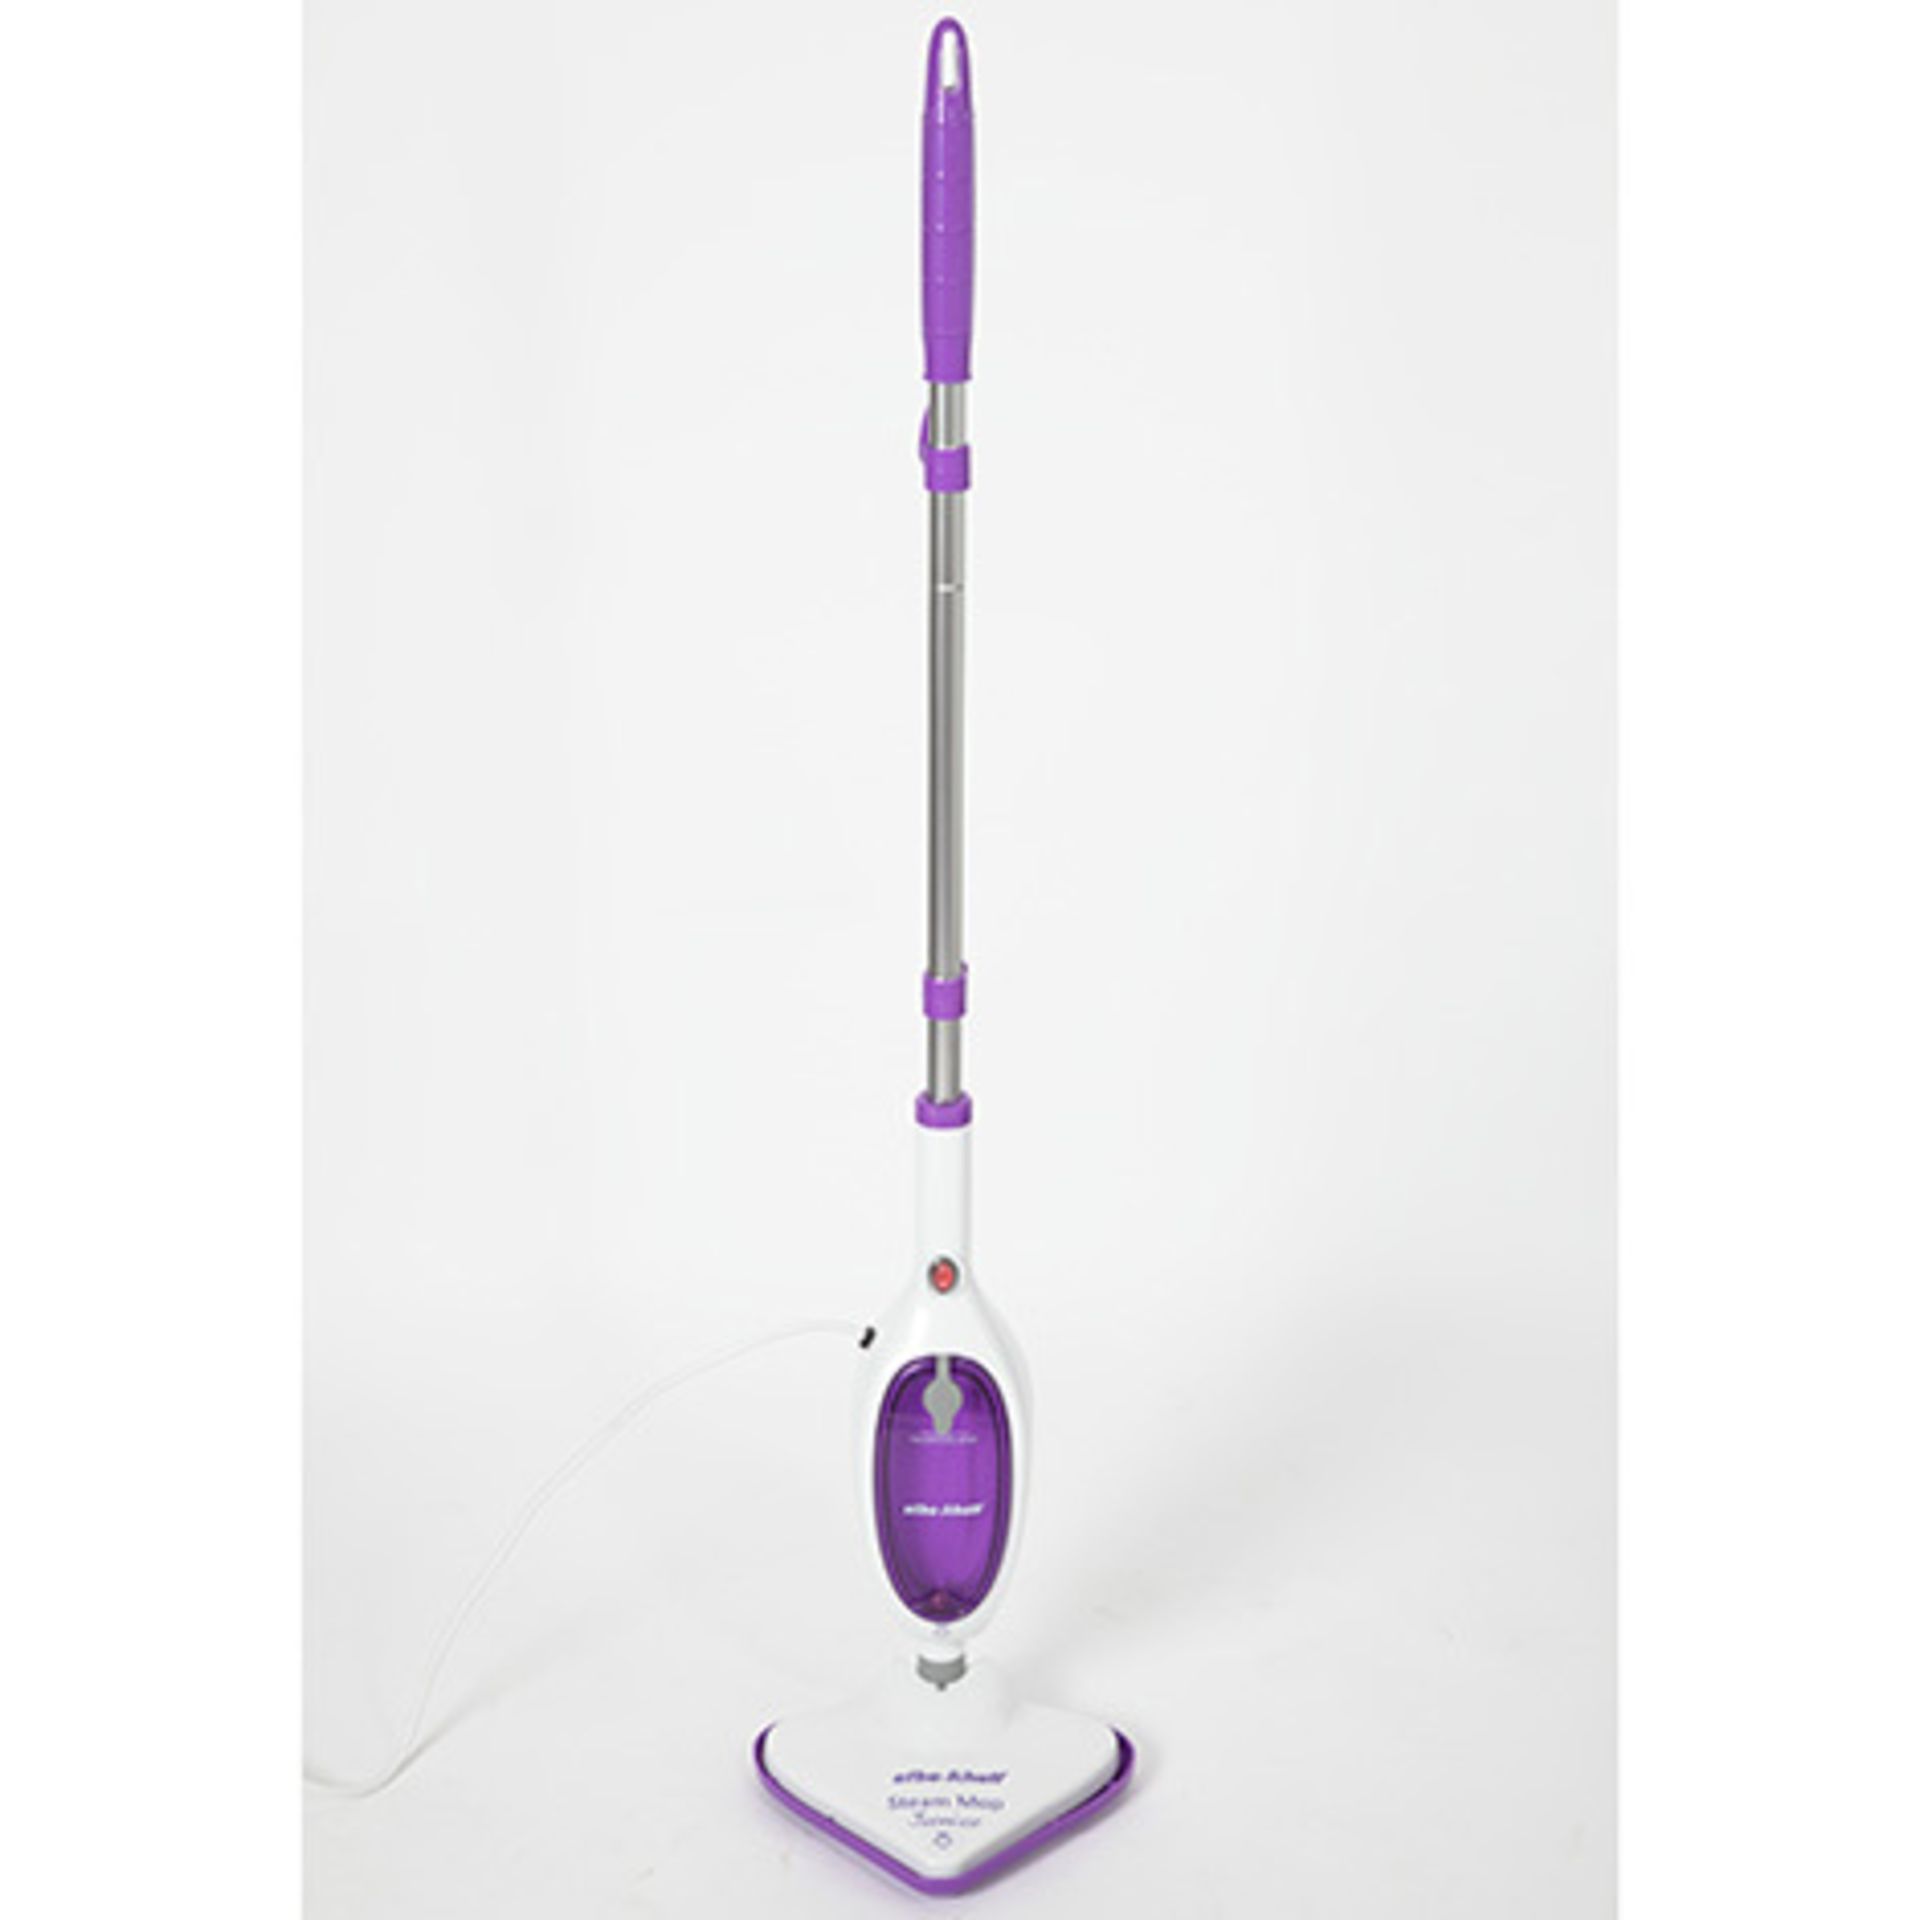 V EFBE 1300watt Steam Mop (colour may vary from picture) Brand New Boxed RRP £59.99 - Image 4 of 4